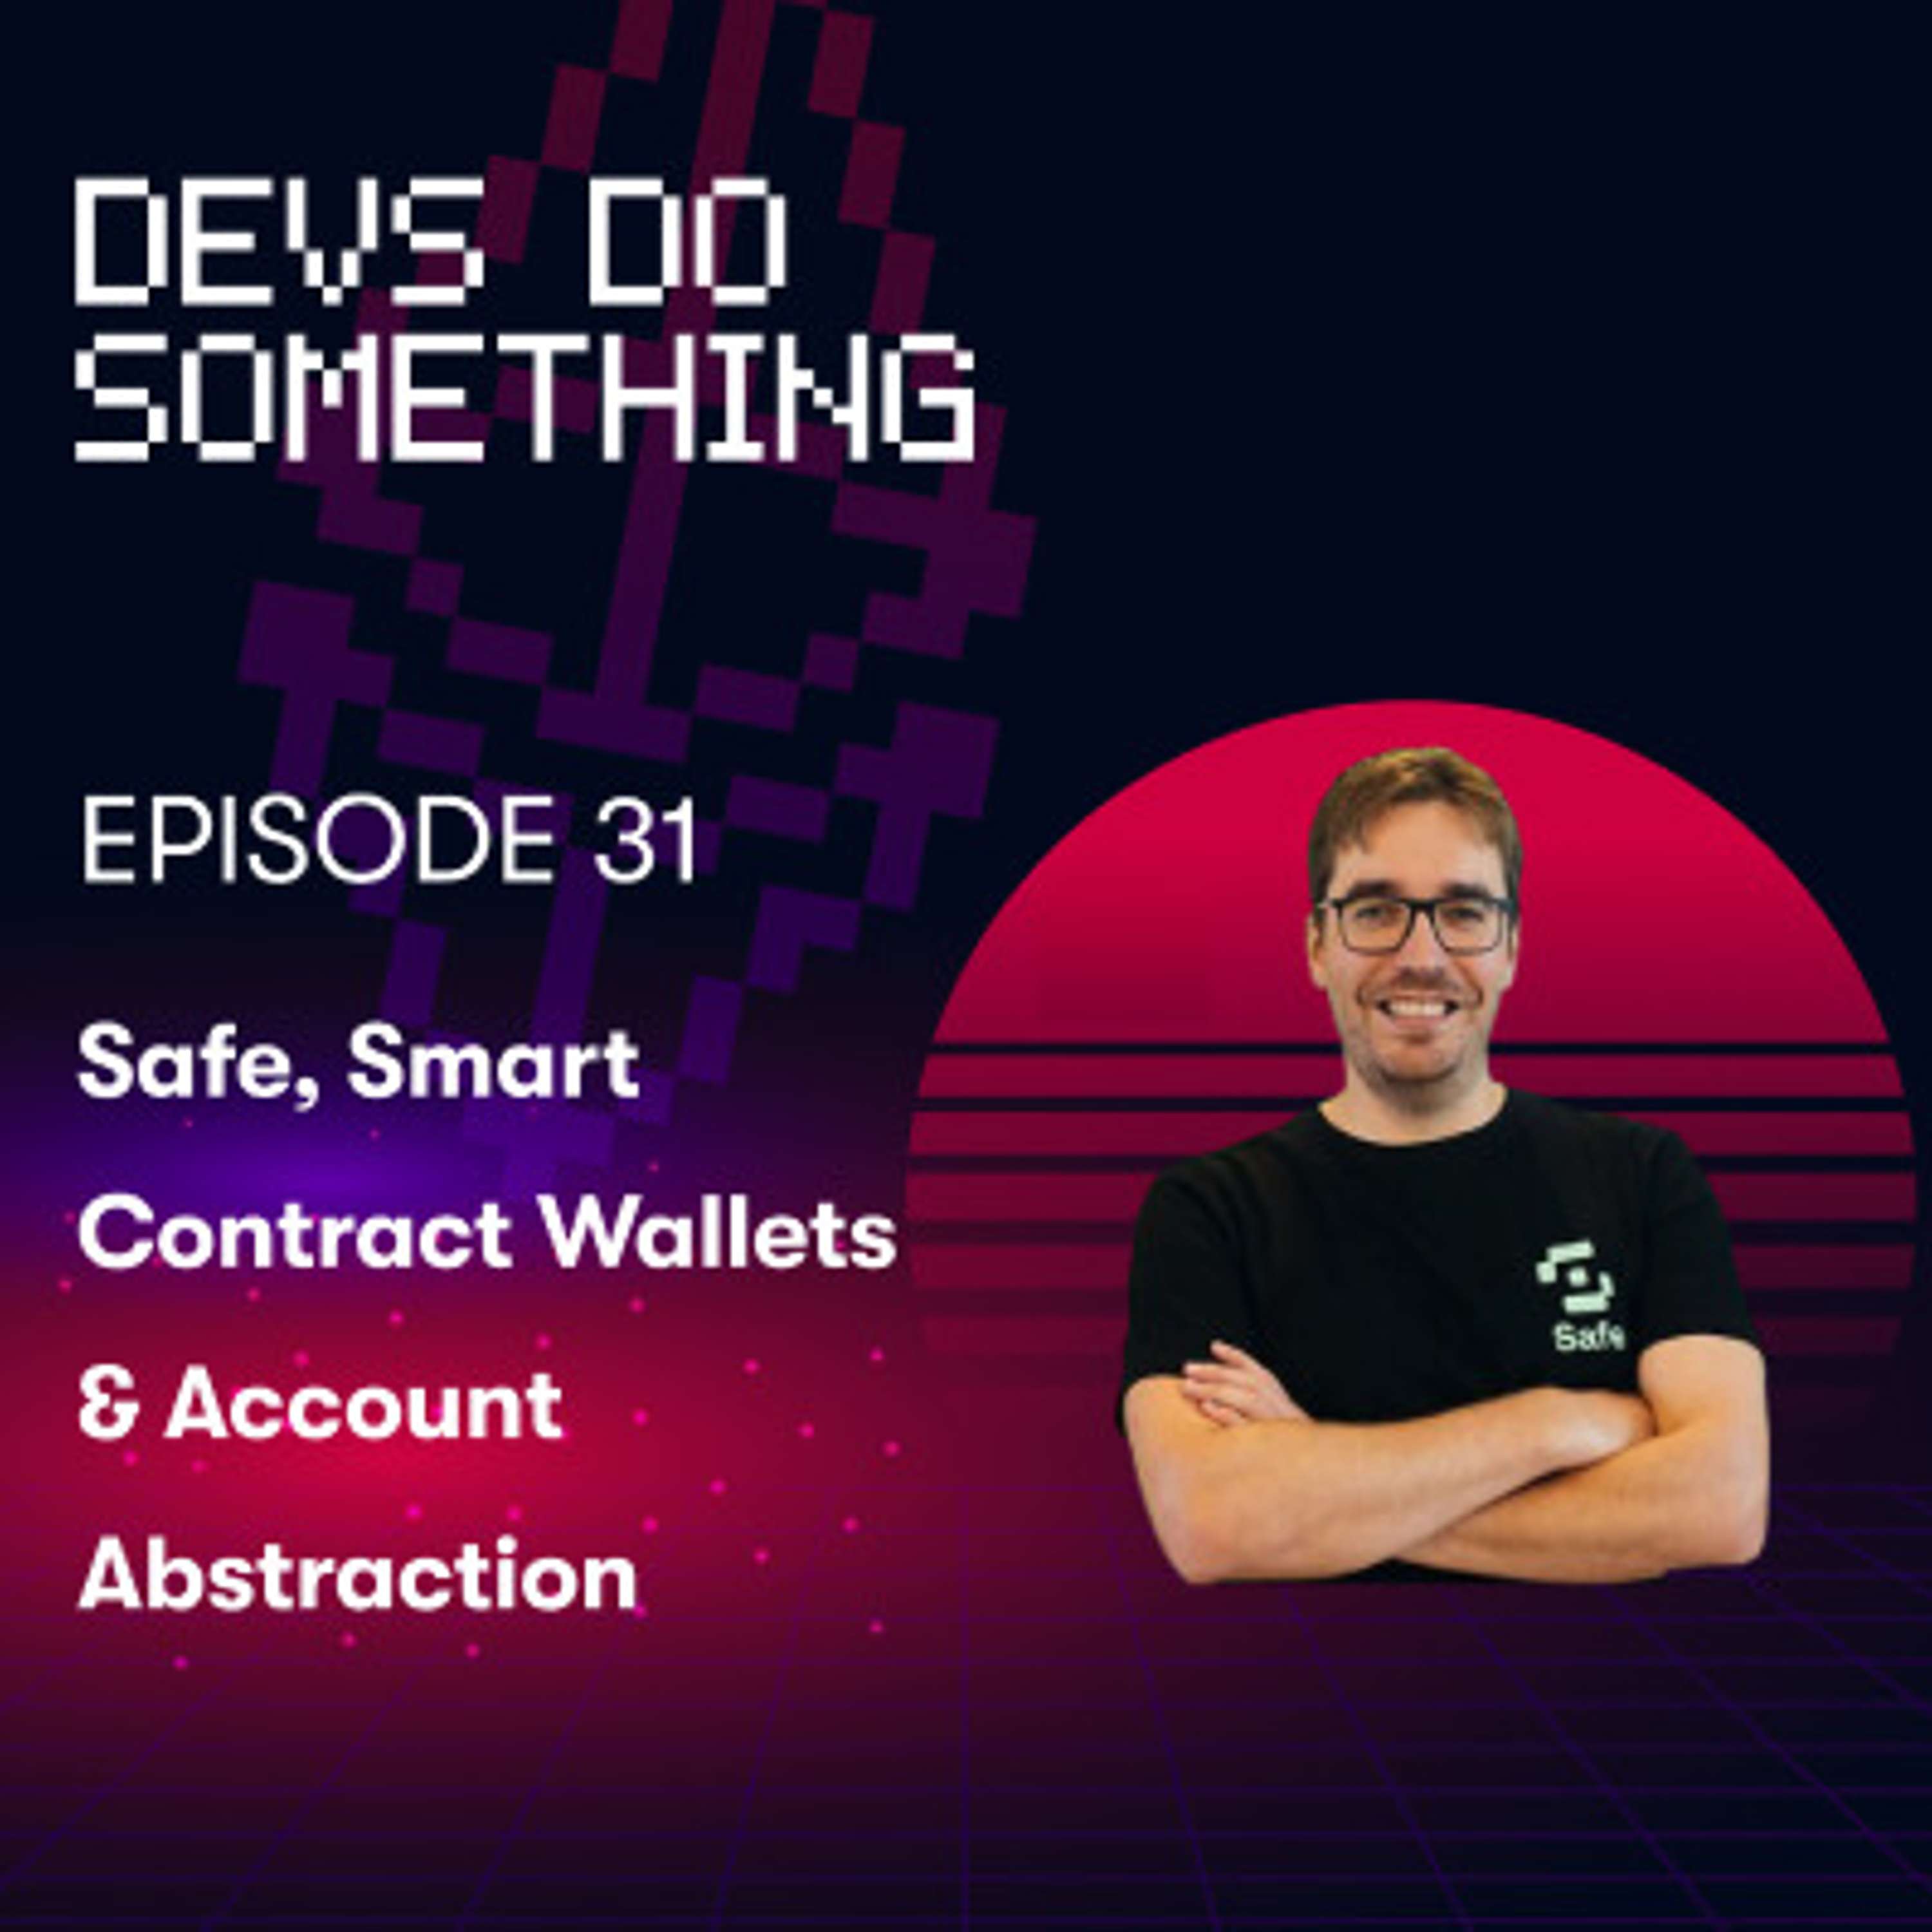 Safe, Smart Contract Wallets, & Account Abstraction with Richard Meissner